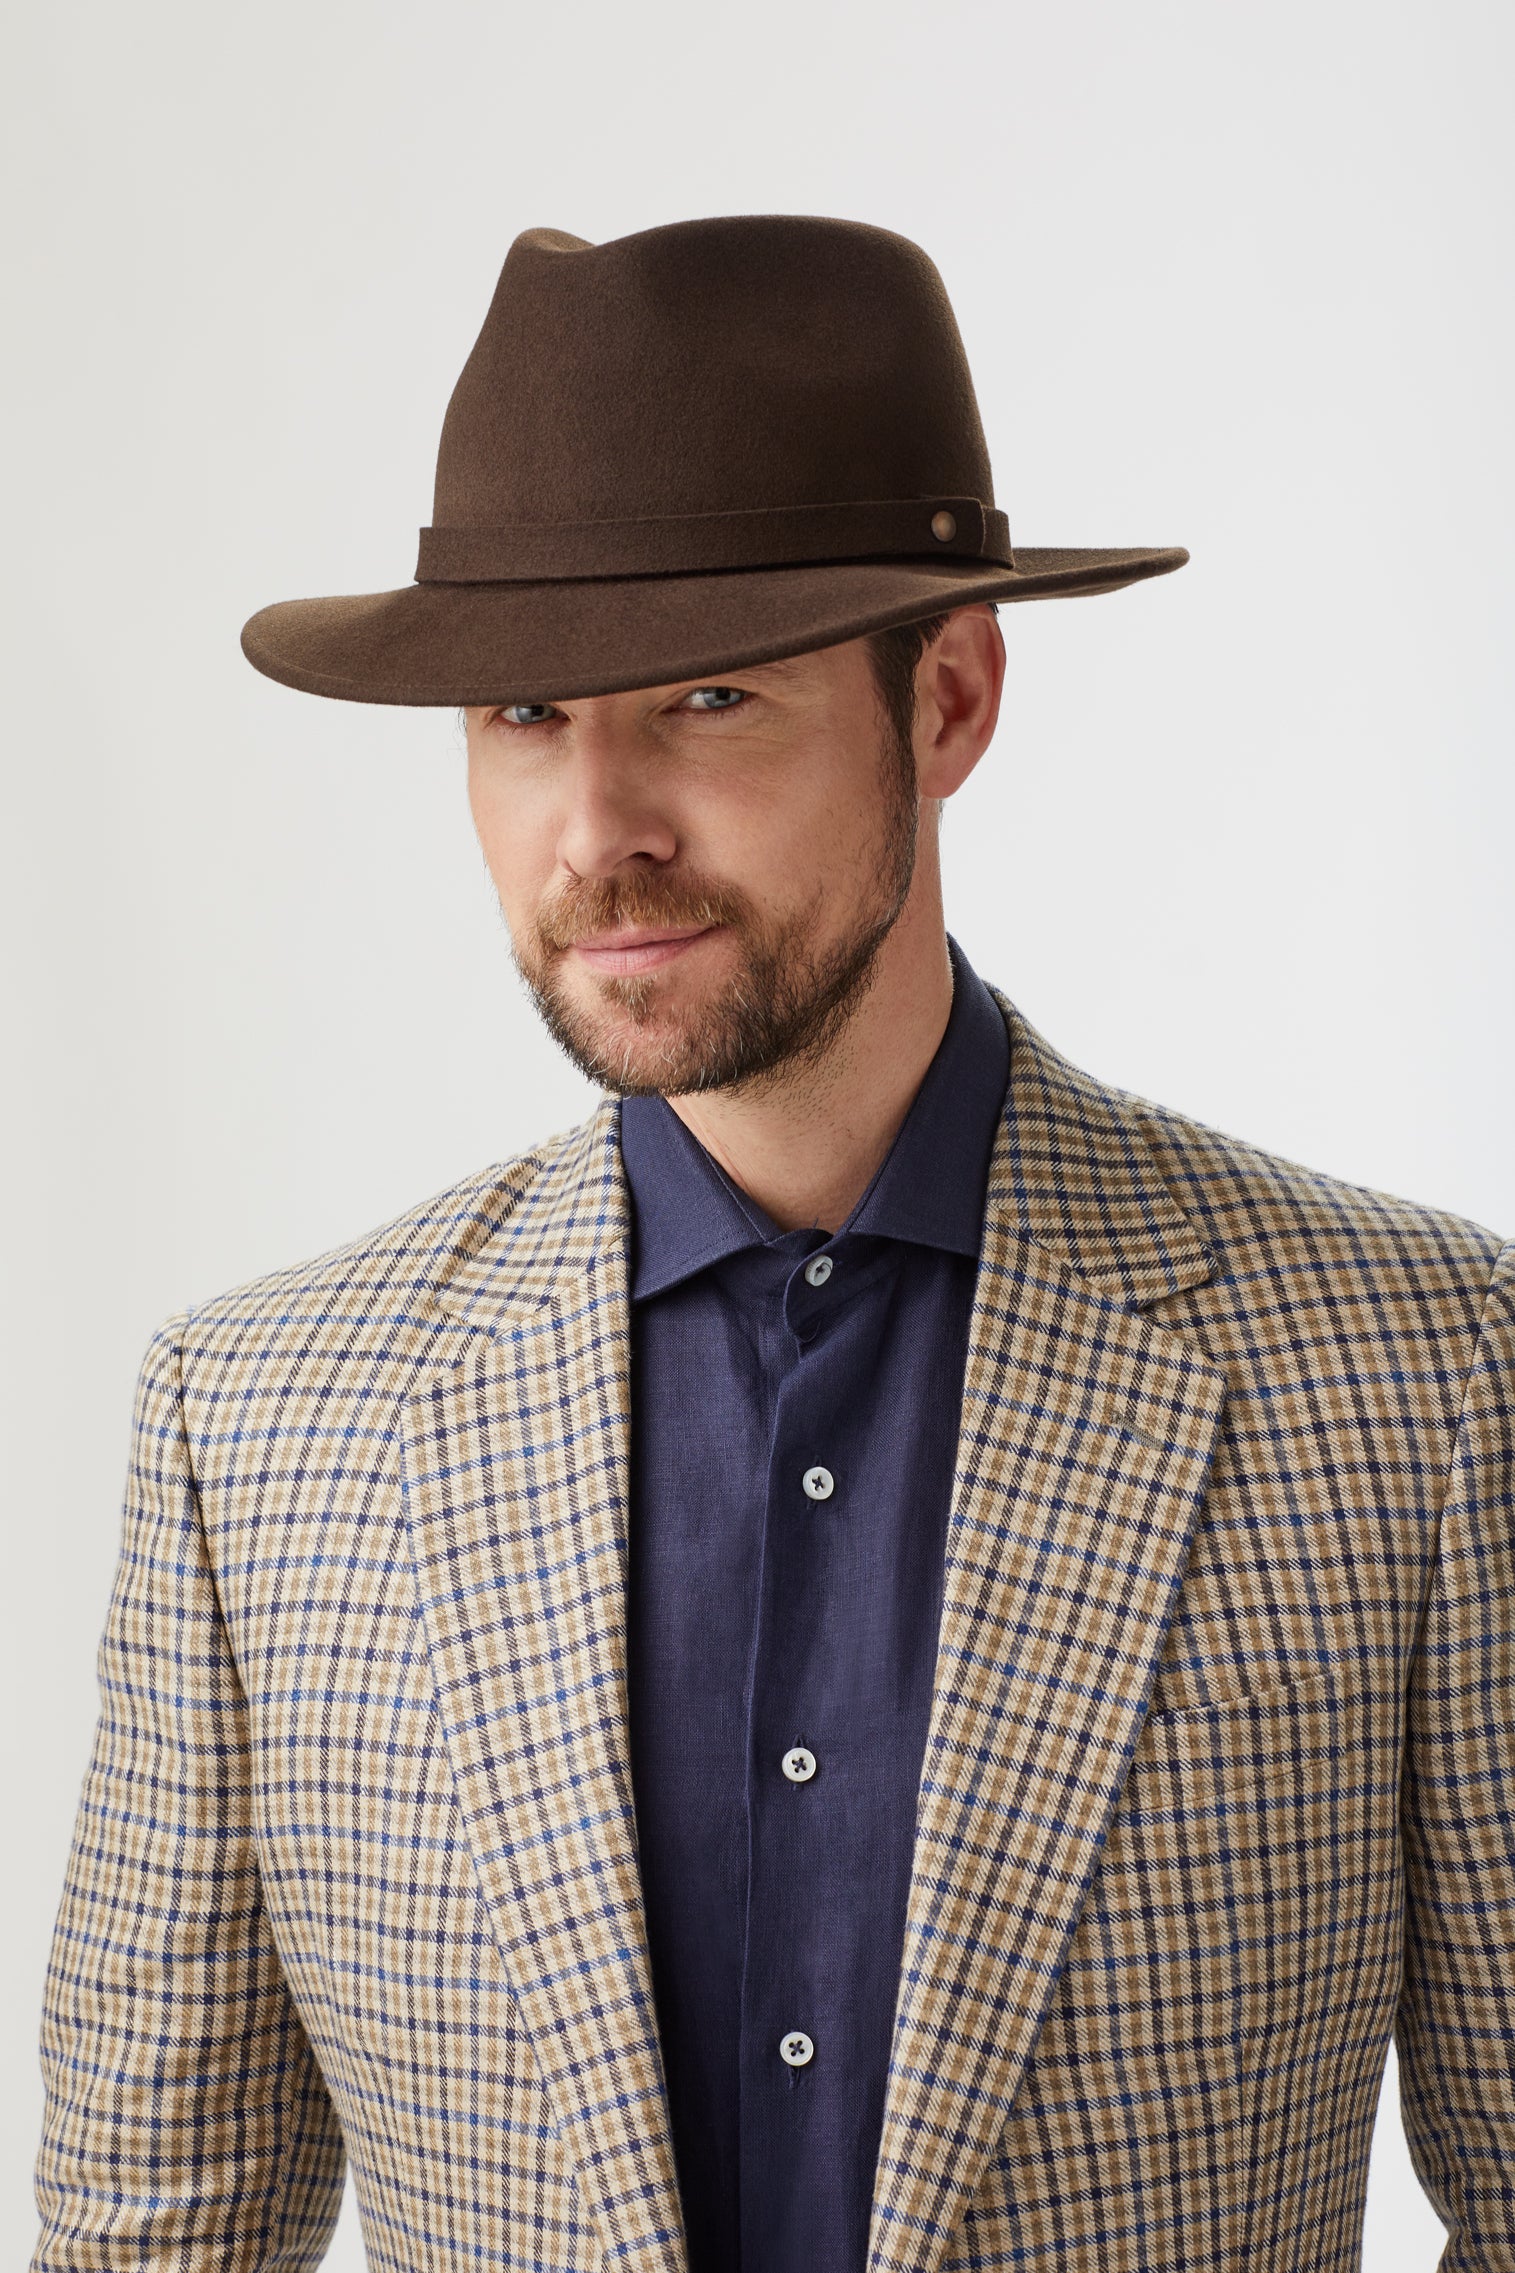 Nomad Rollable Trilby - Hats for Heart-shaped Face Shapes - Lock & Co. Hatters London UK